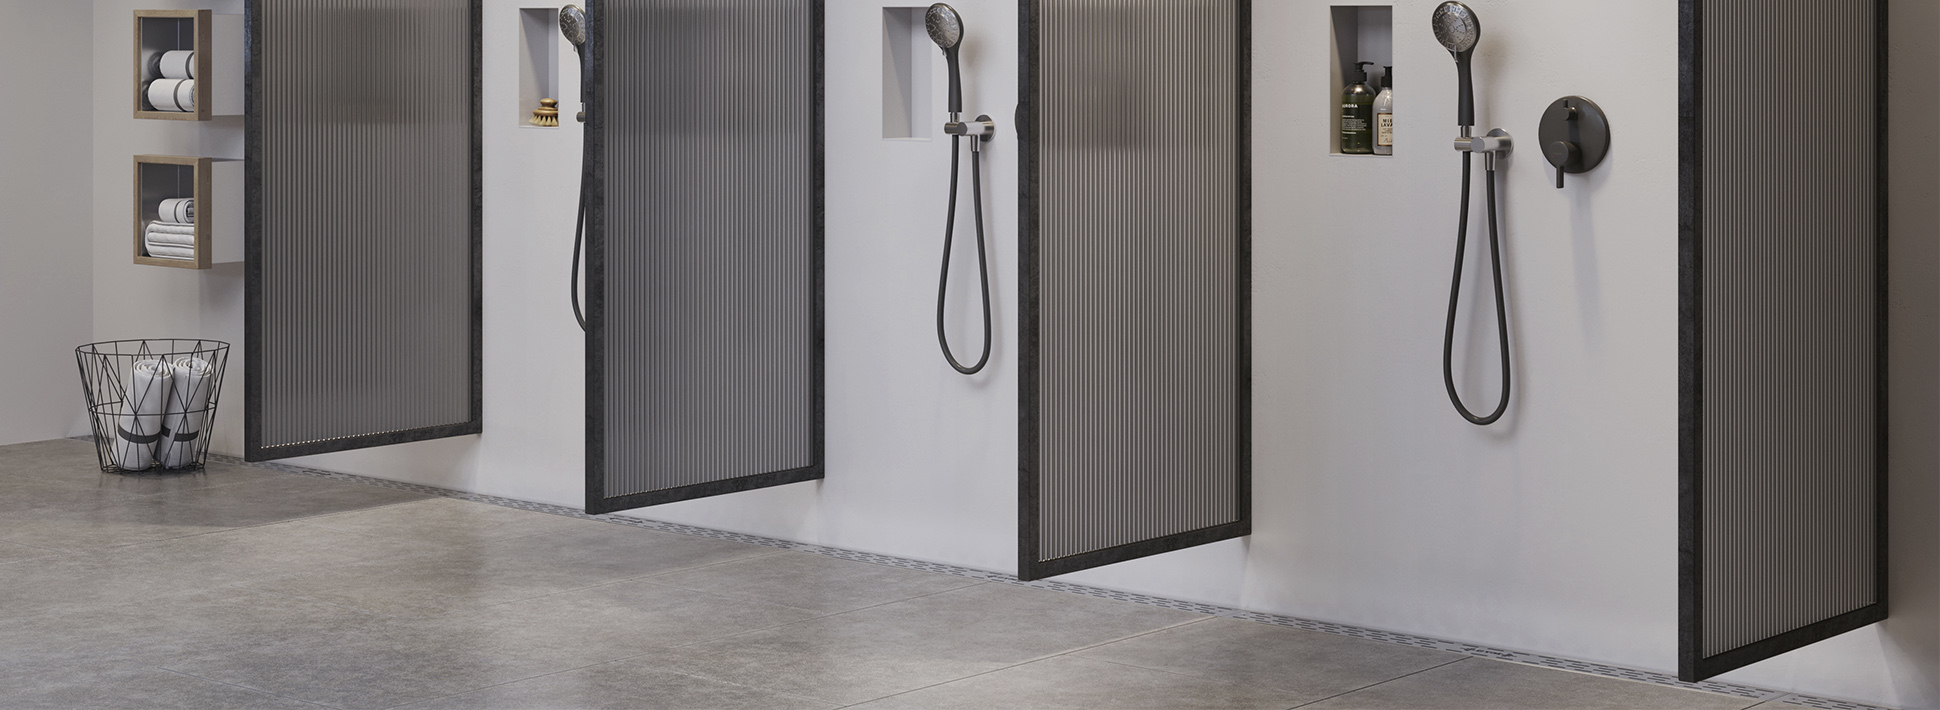 Self-adhesive Sealing Set shower boards installed in a shower area with multiple stalls